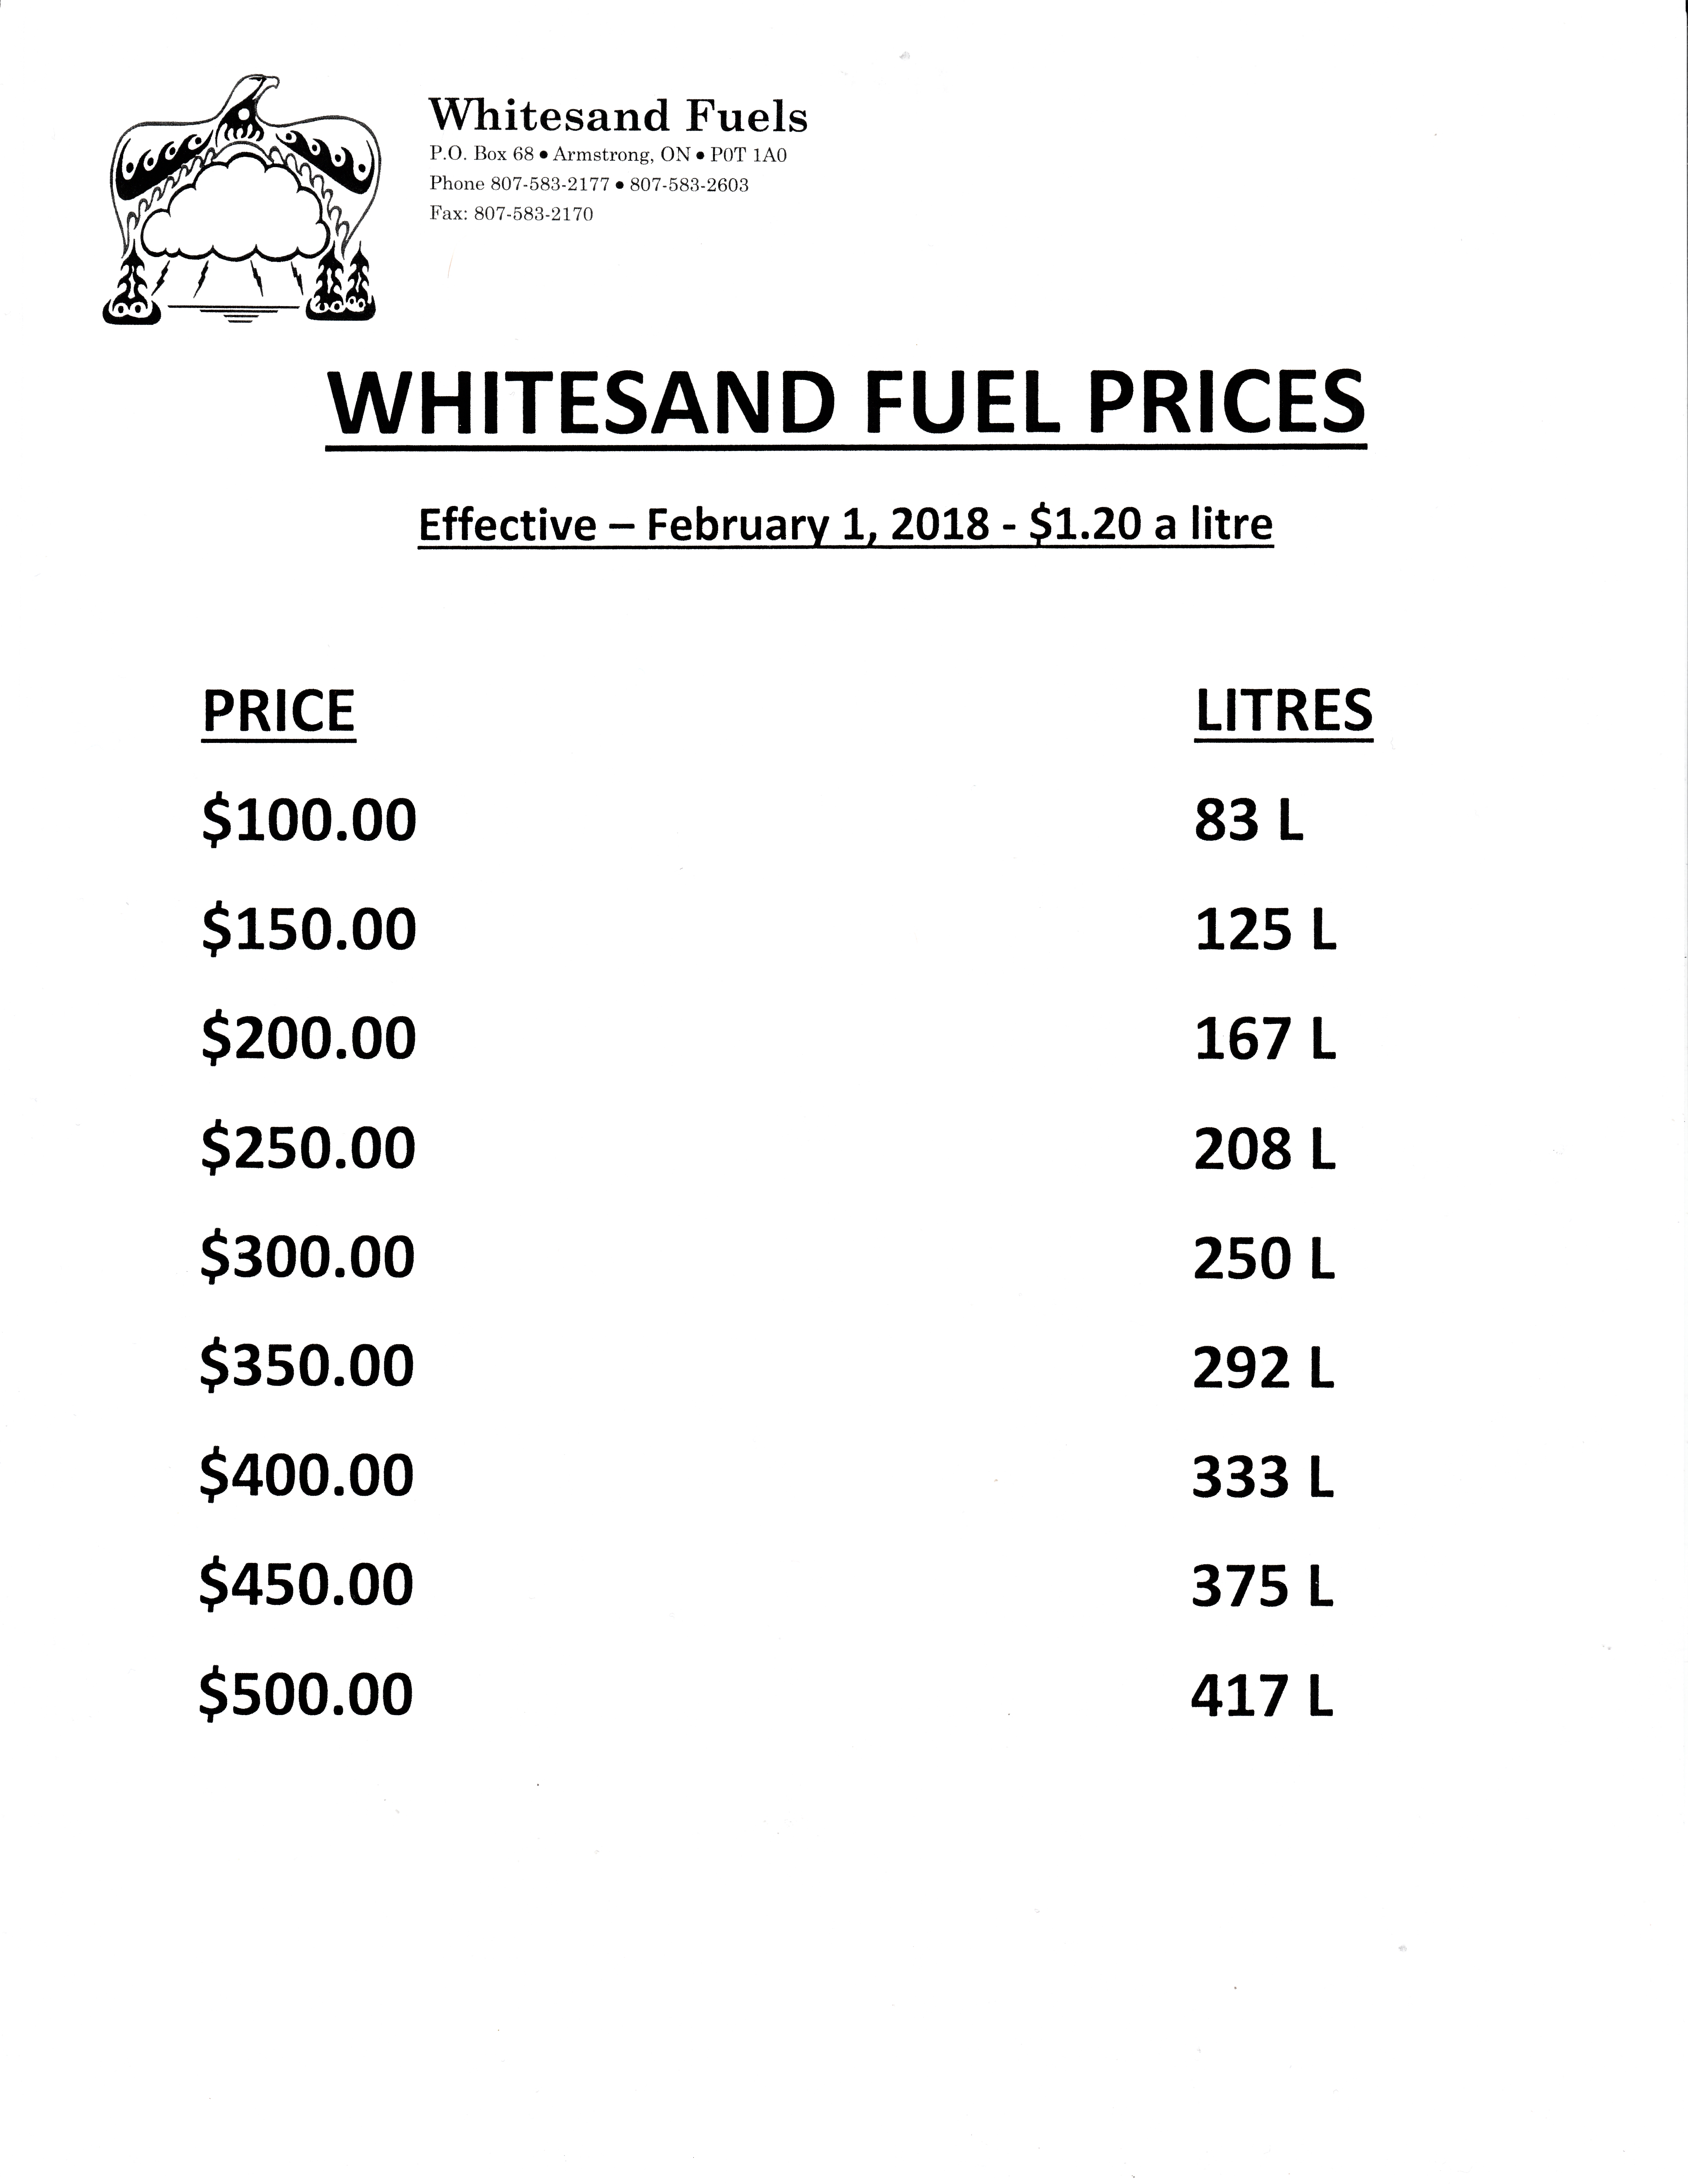 Updated Pricing for Heating Oil